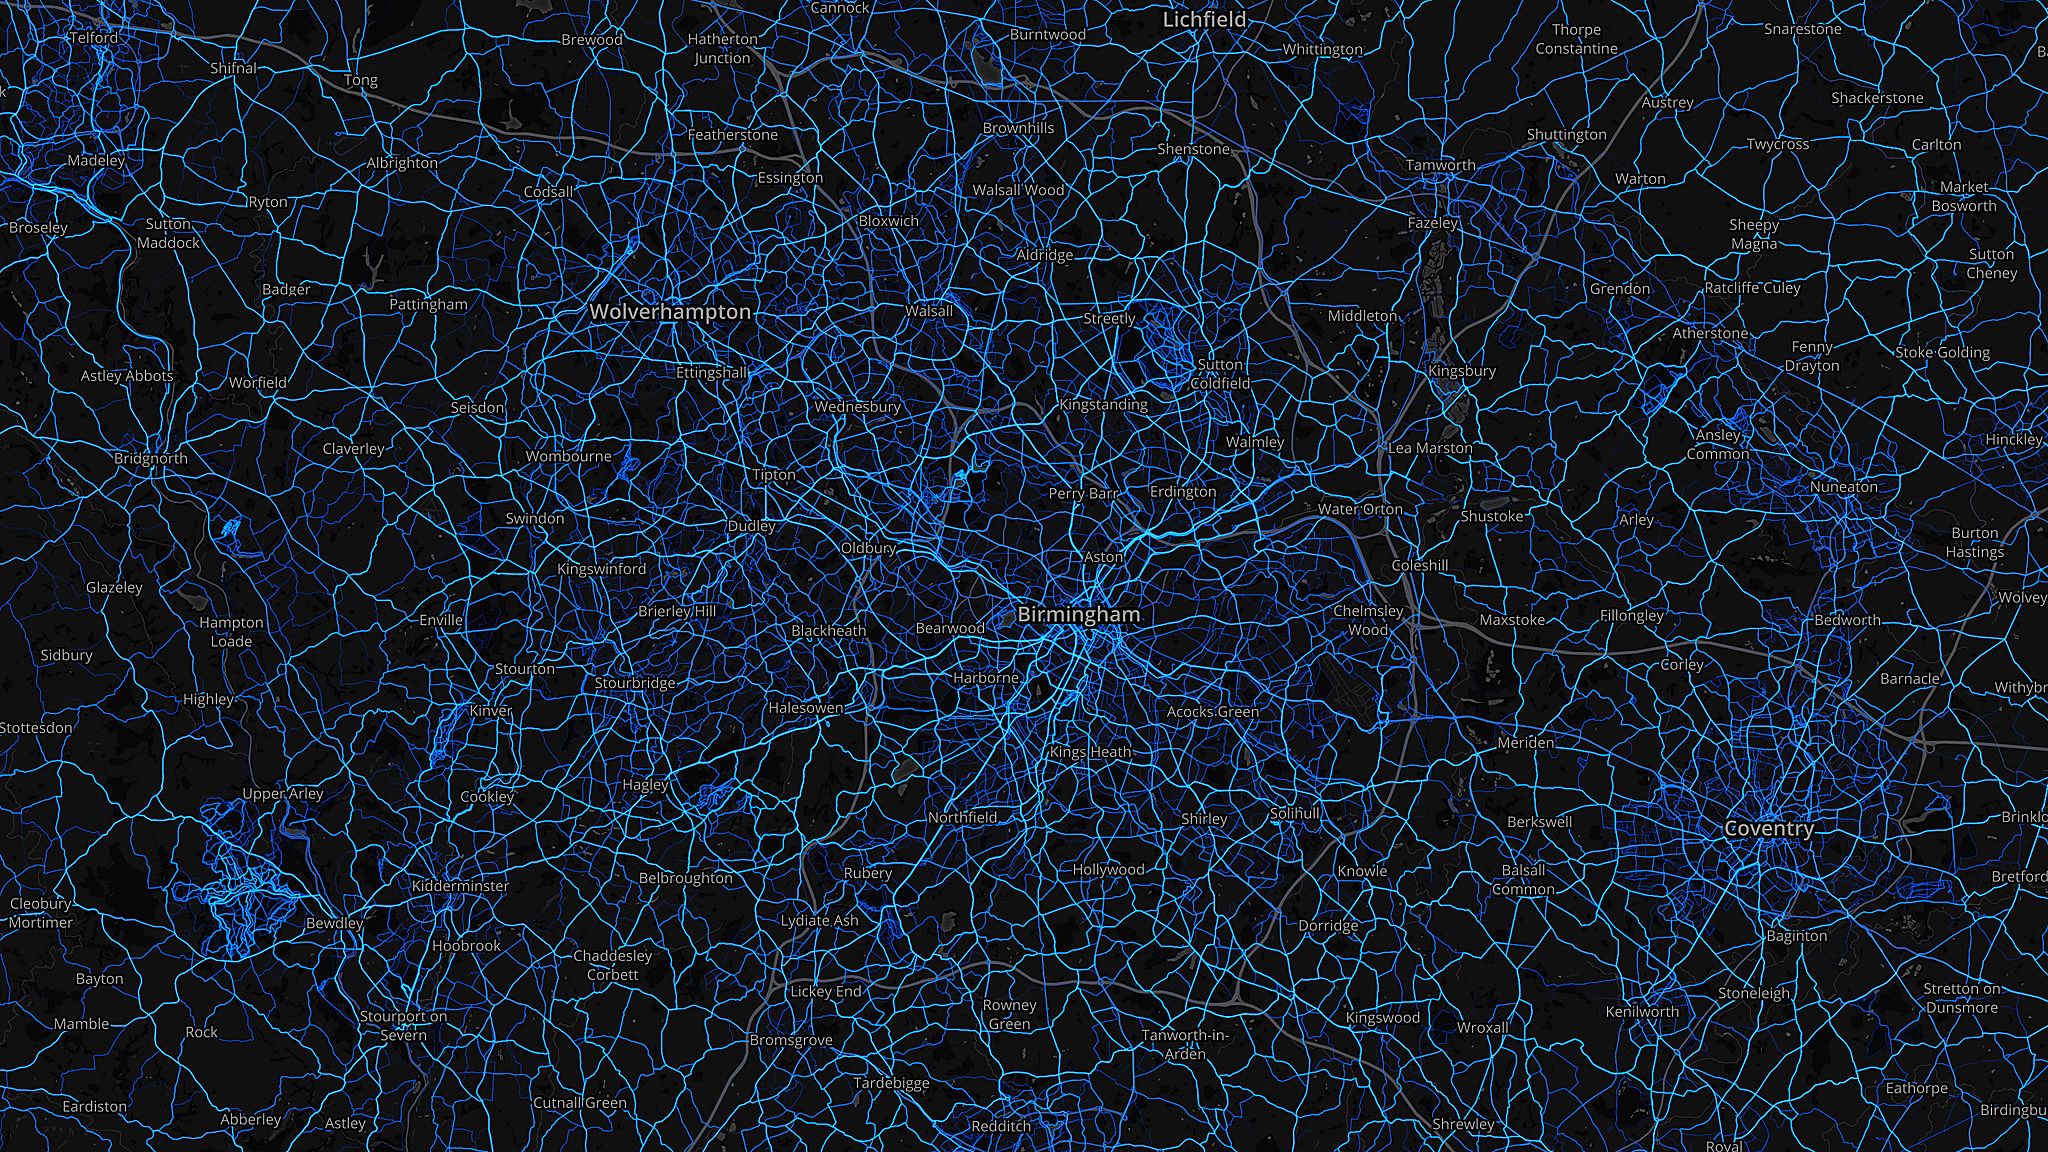 West Midlands - cycling routes (by Strava users 2015)